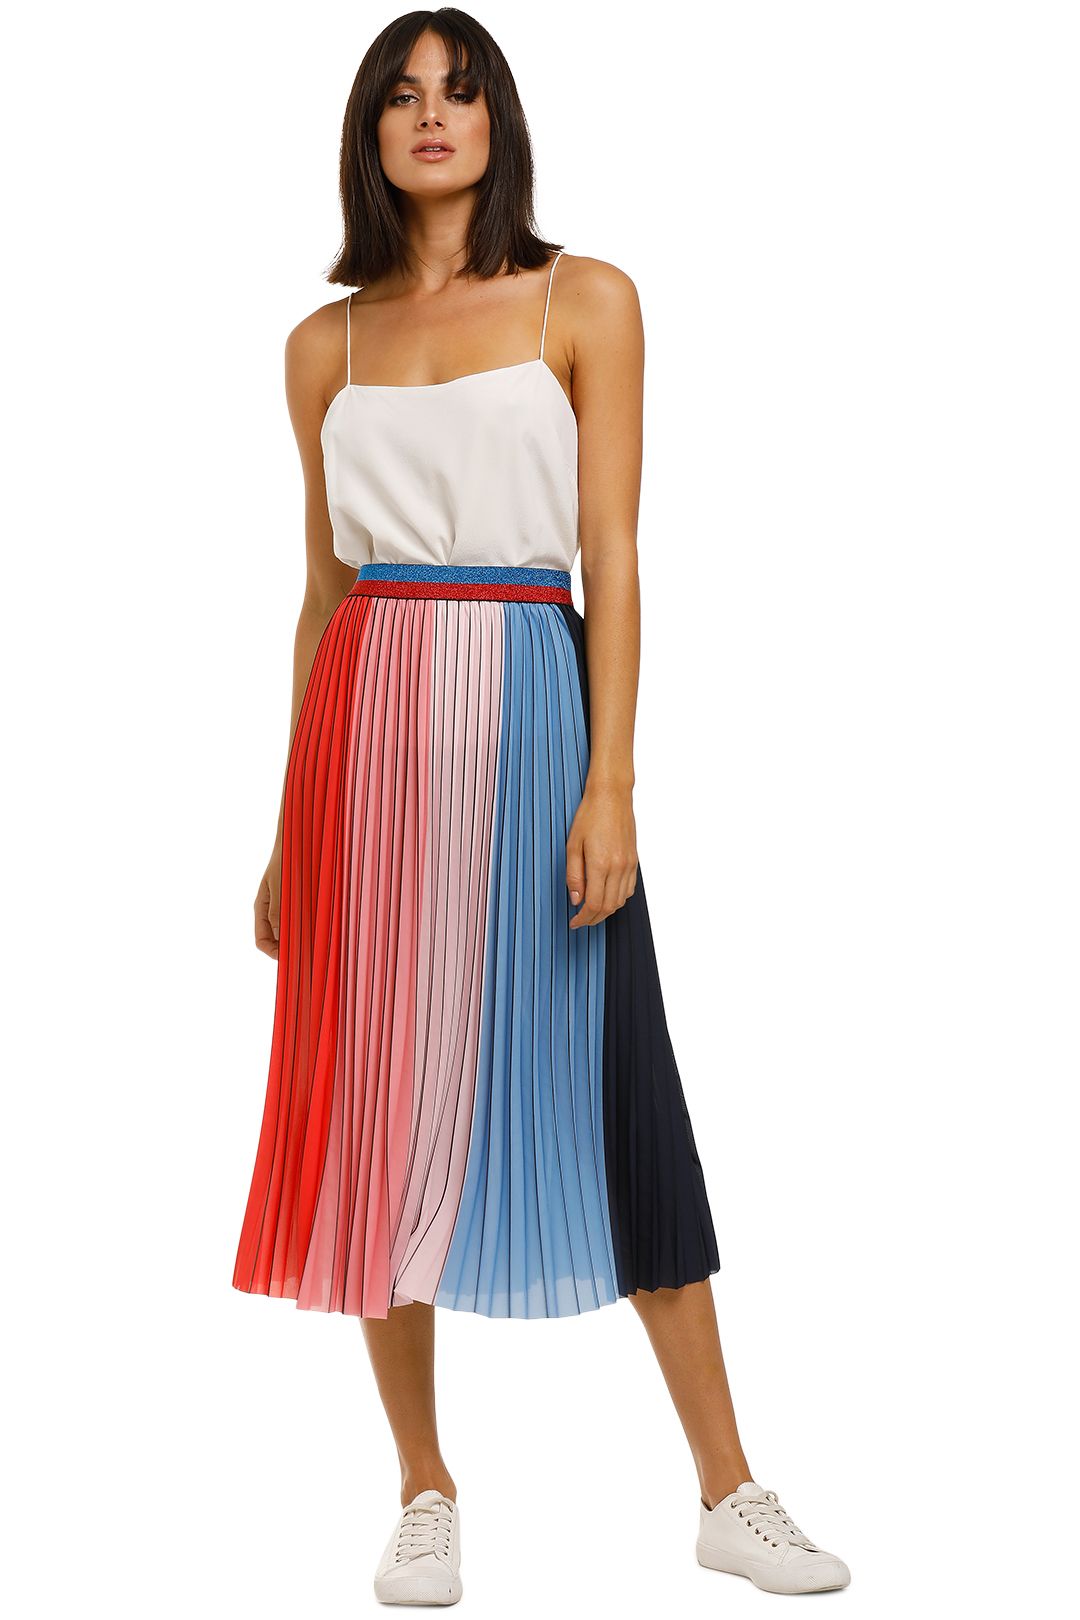 Coop-by-Trelise-Cooper-Let-Them-Pleat-Cake-Skirt-Sherbet-Front